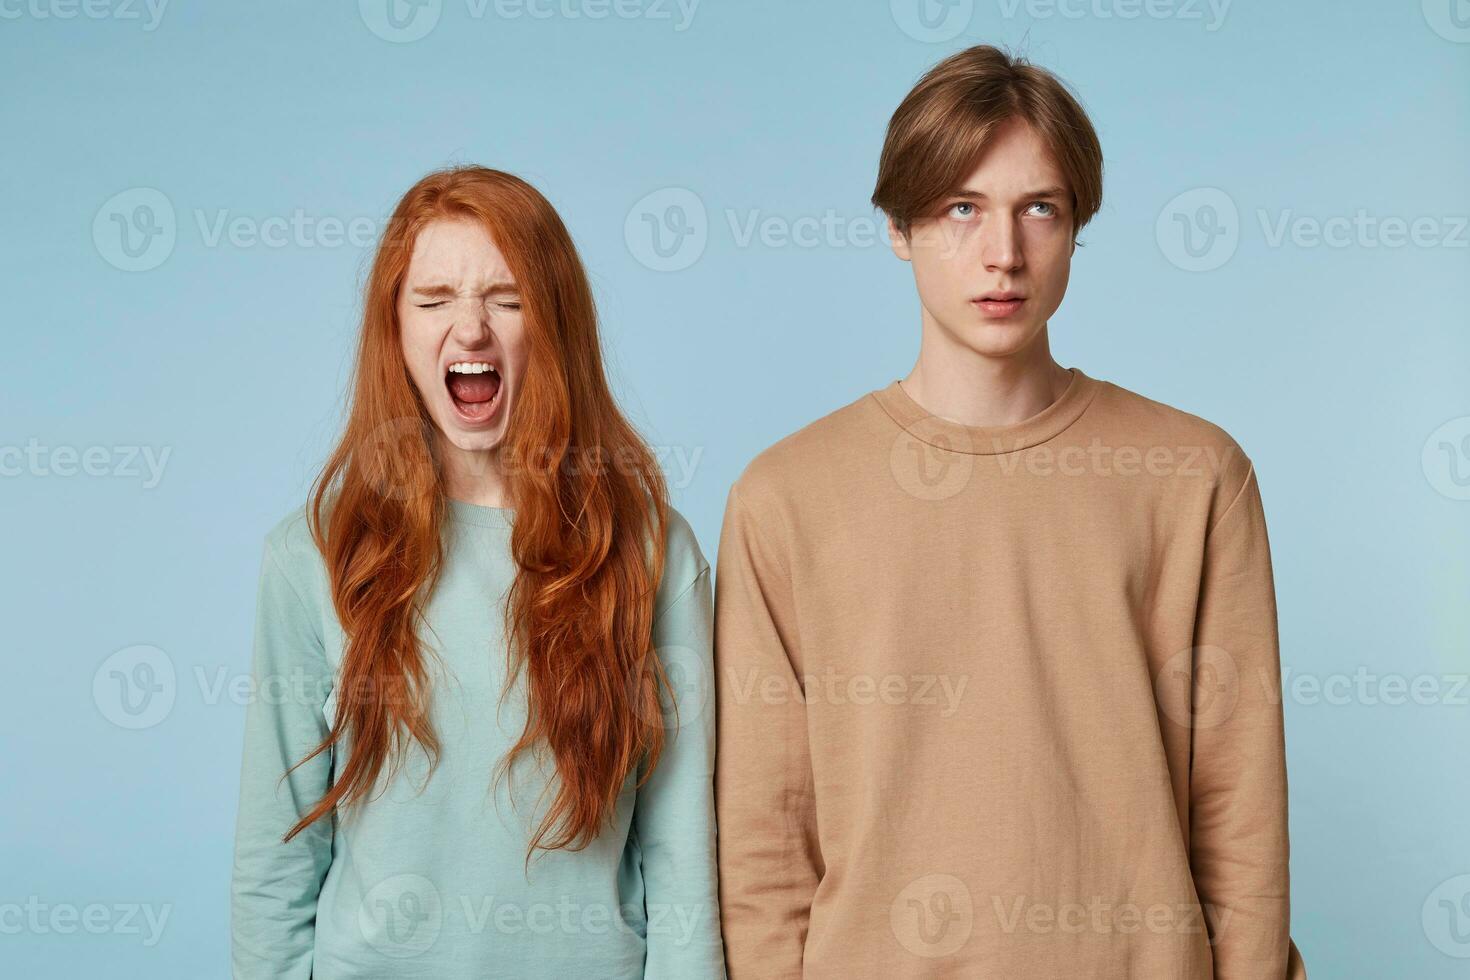 Couple relationship. A girl with red long hair stands with eyes closed opening her mouth wide as if screaming, the guy next to her is rolling his eyes up tired of listening to the cries, of quarreling photo